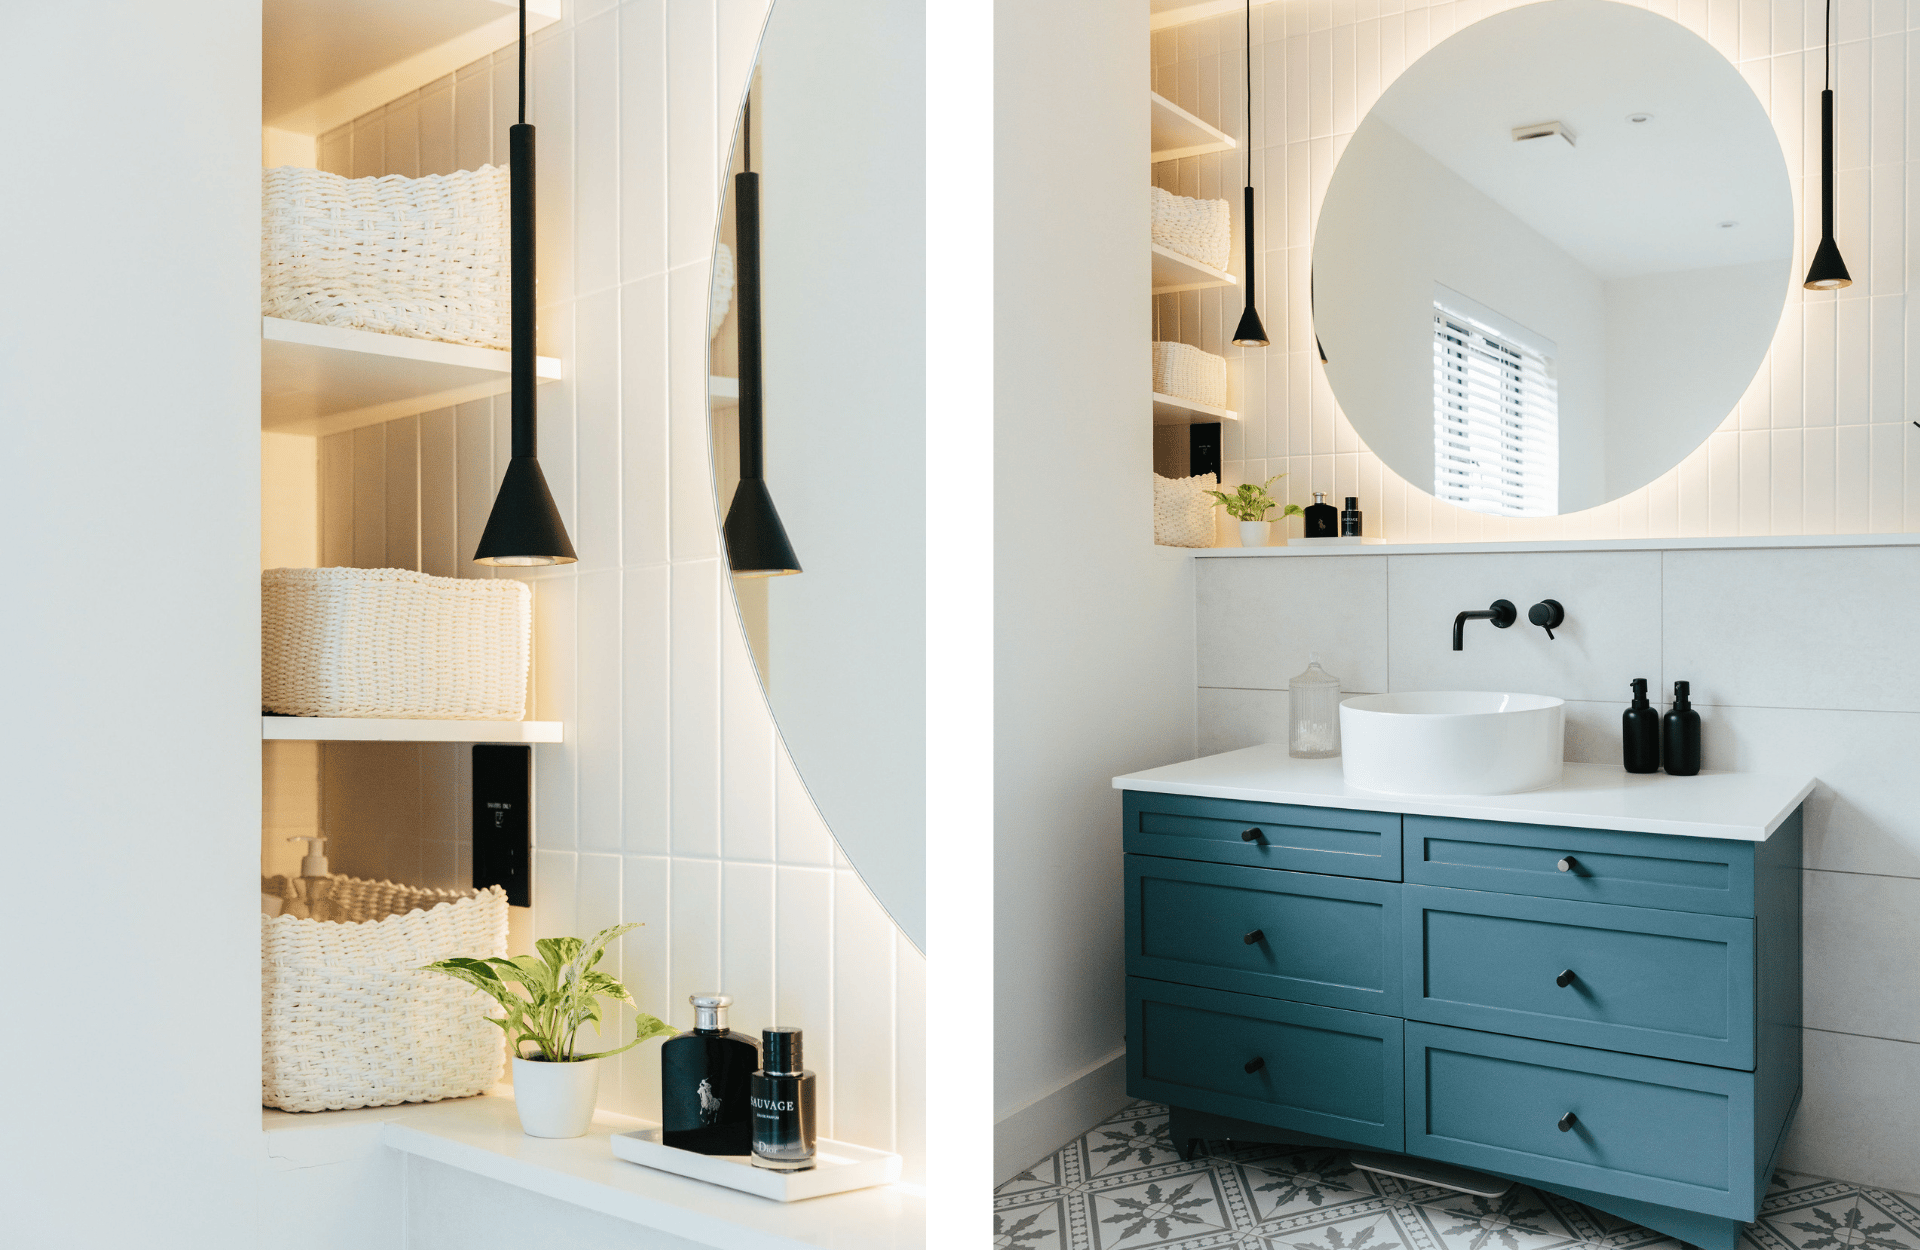 Storage ideas for small bathrooms